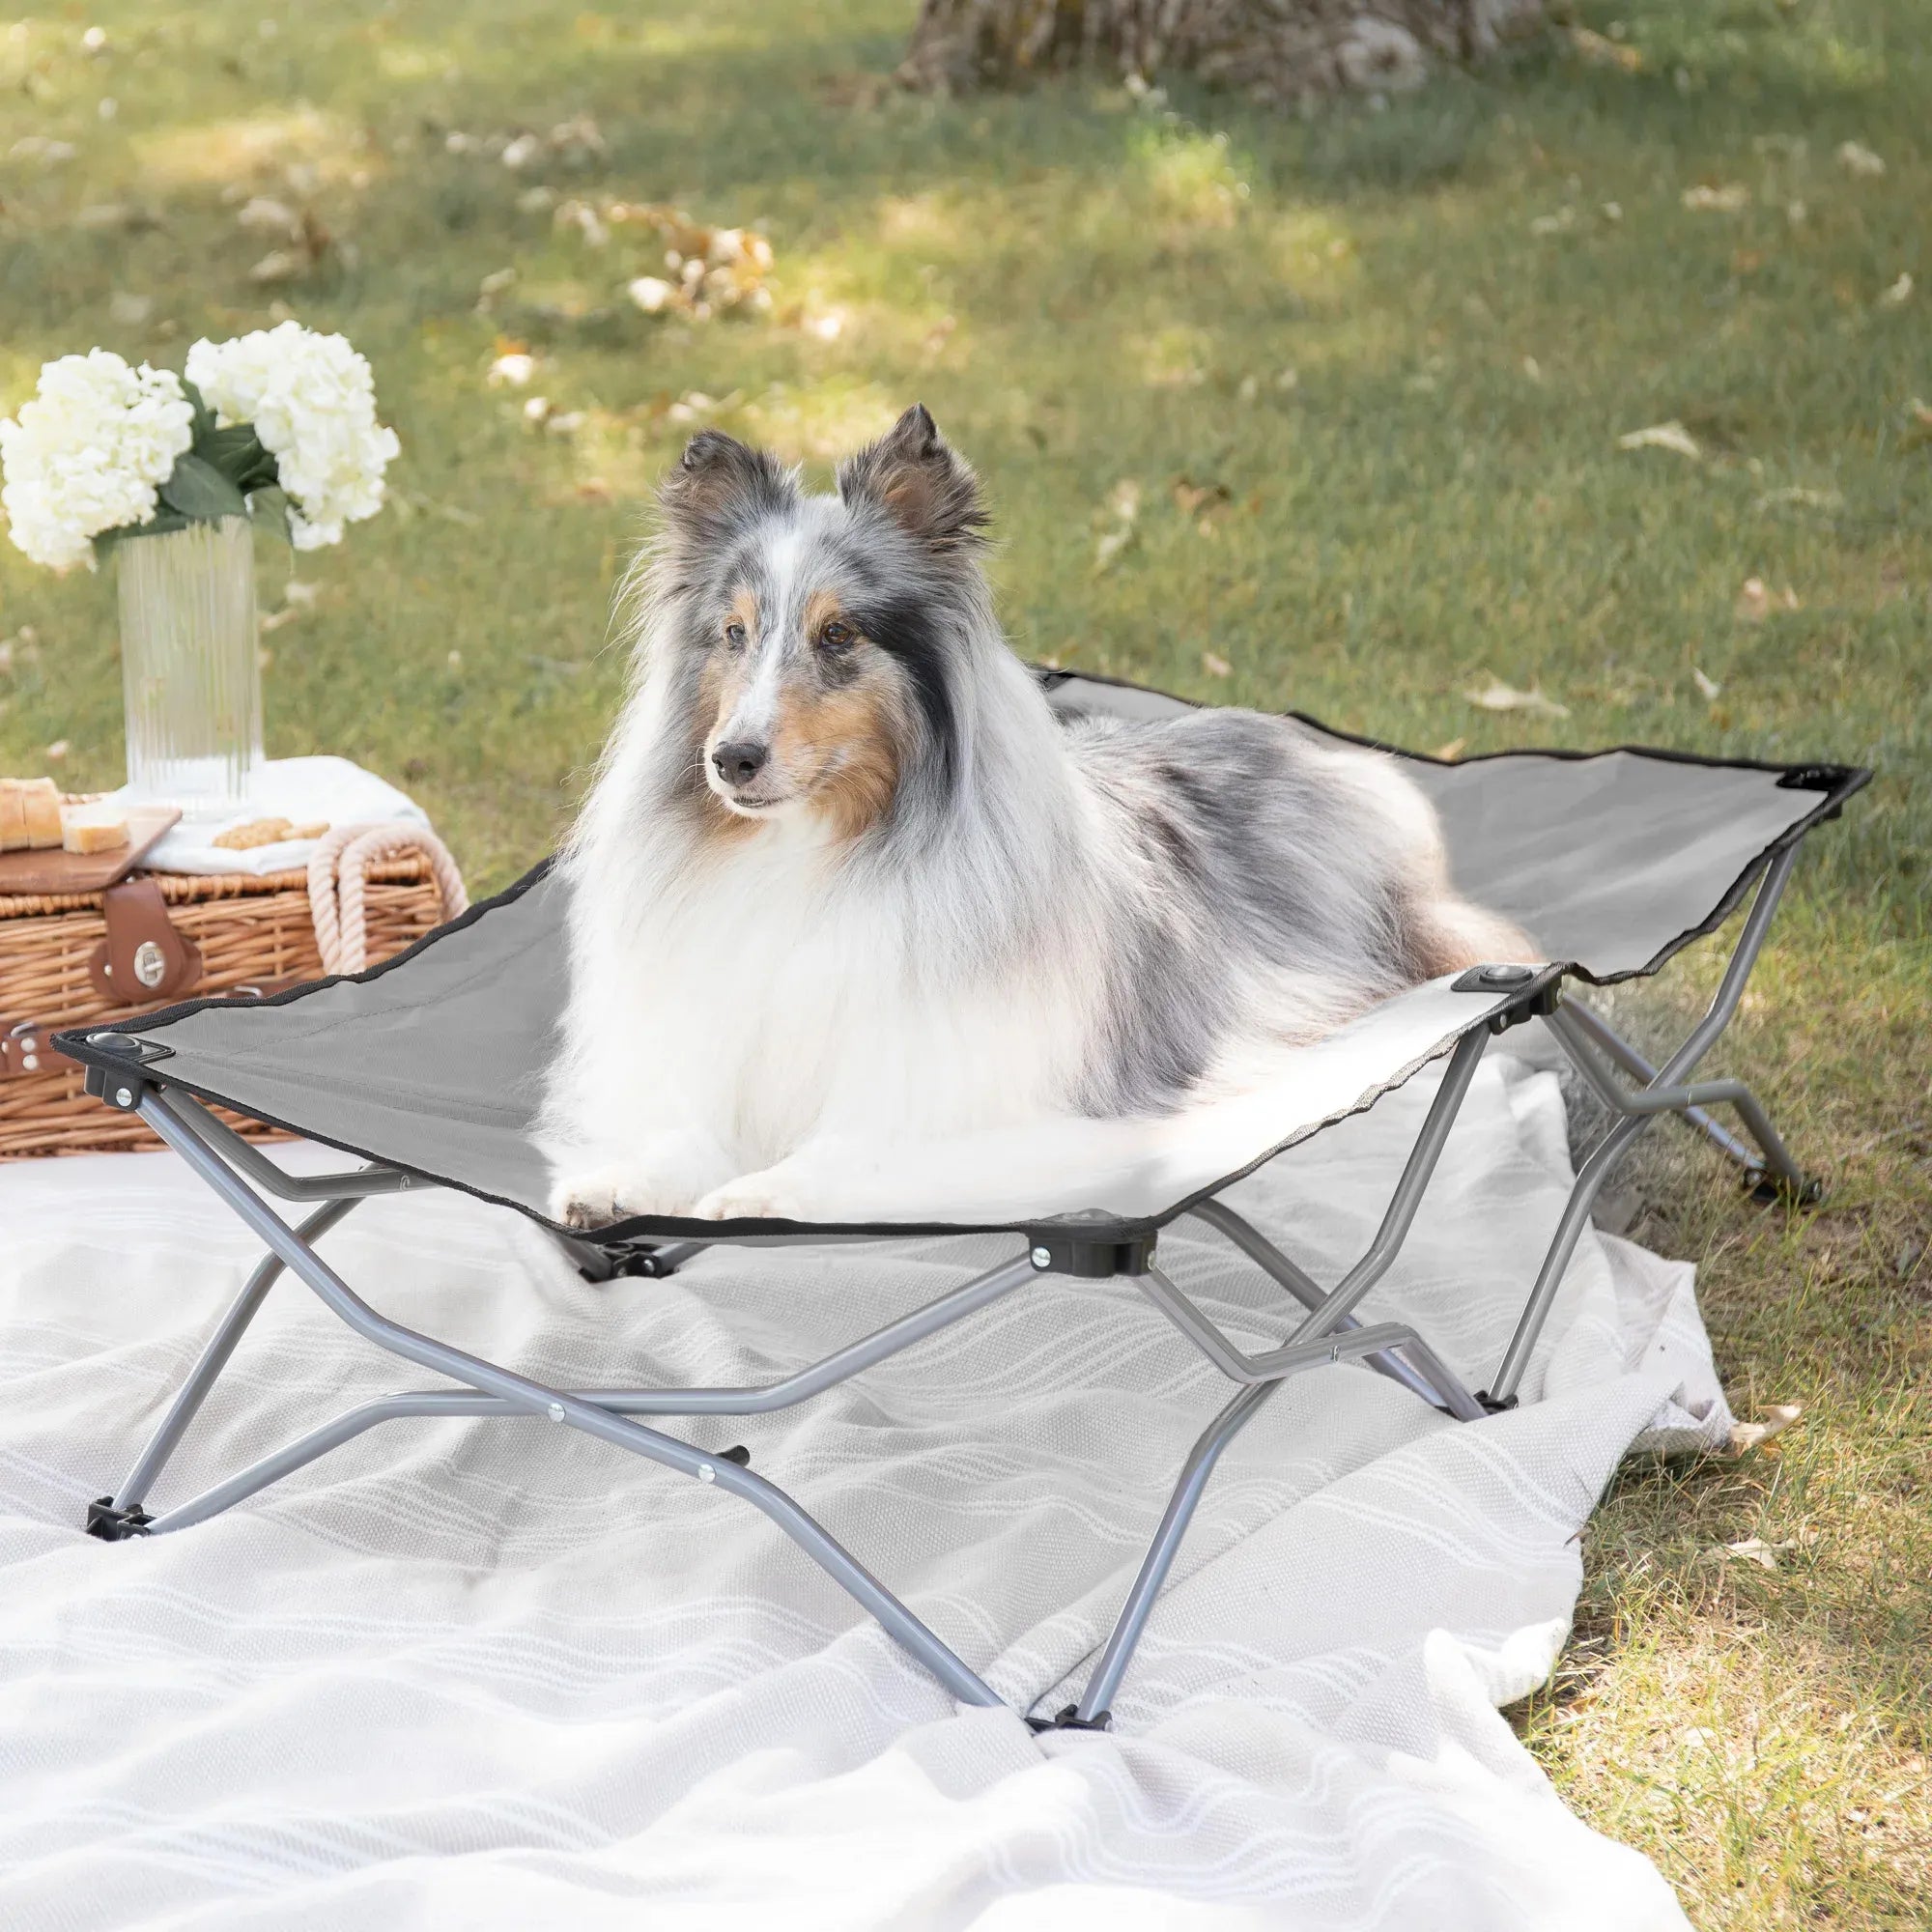 Large Portable Pup Pet Bed